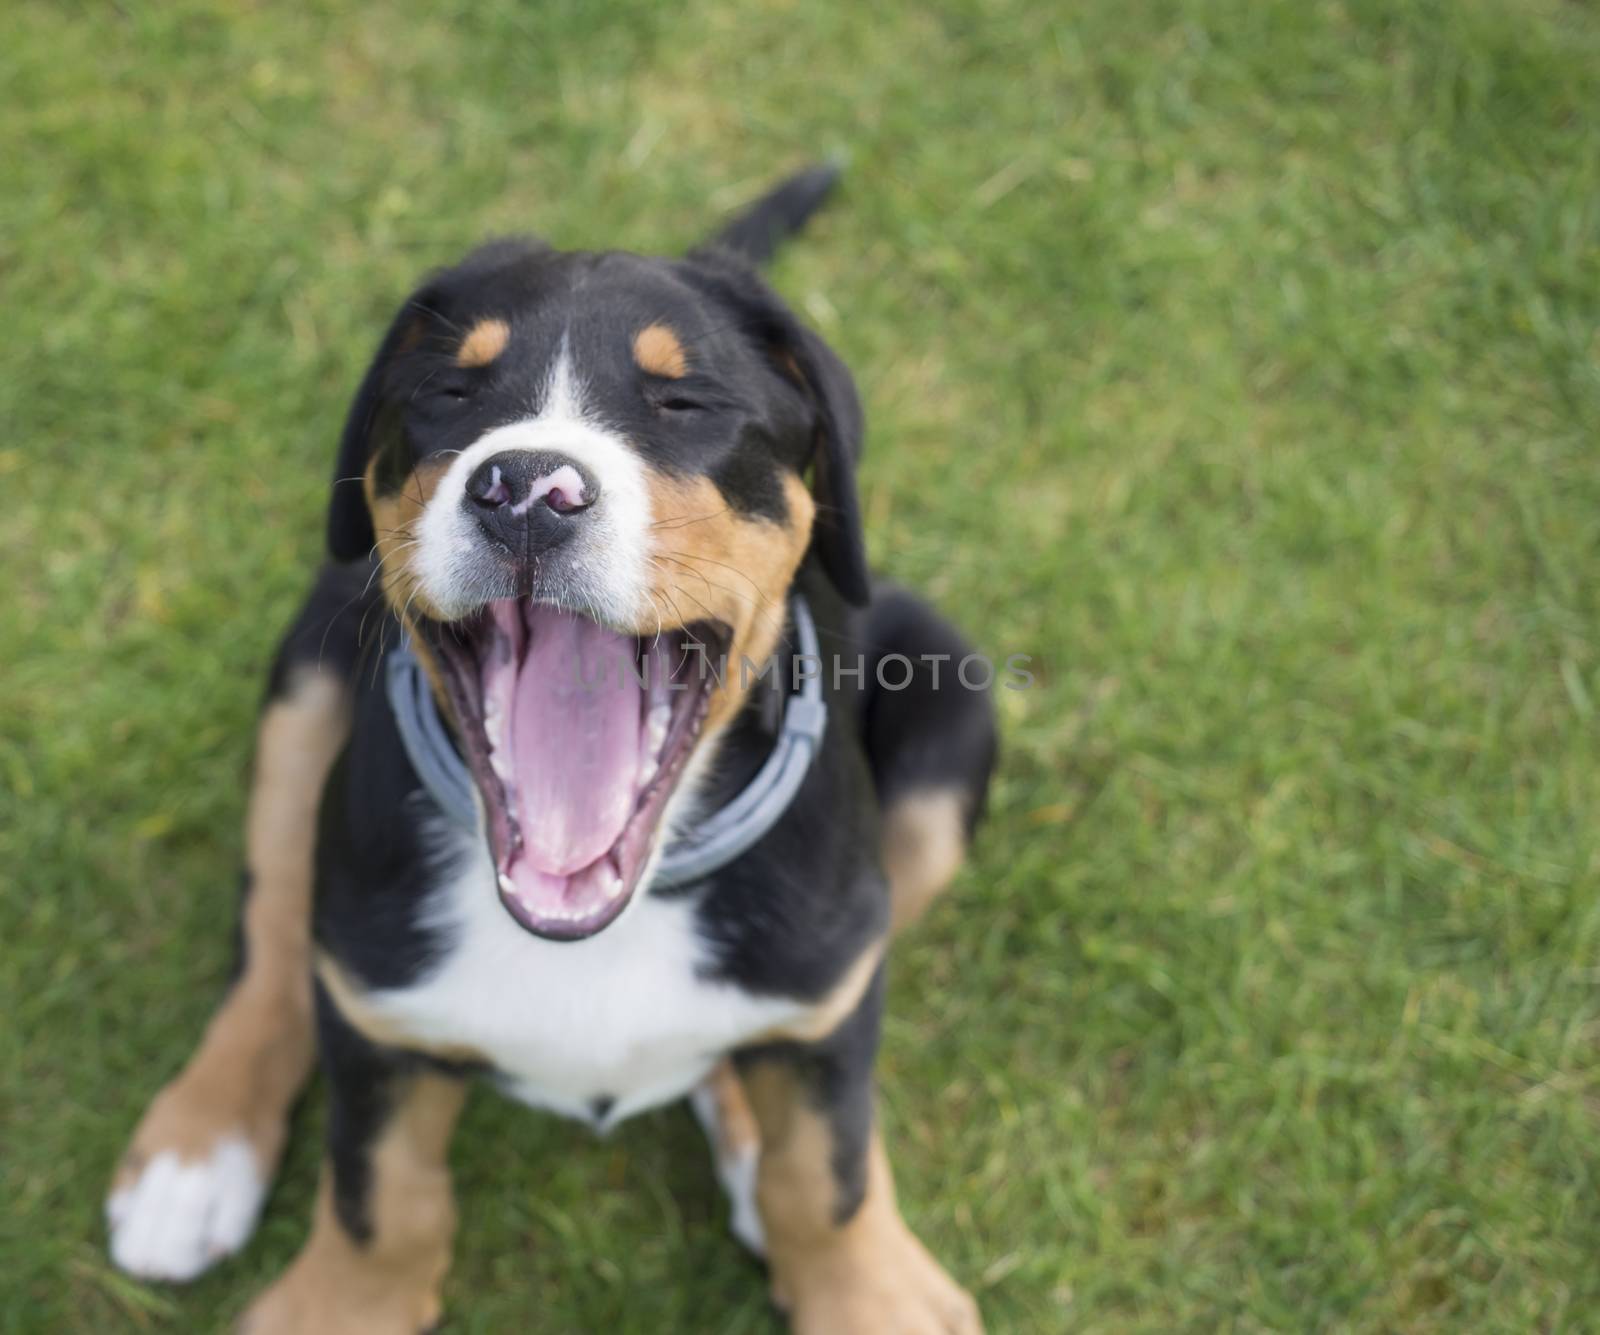 yawning cute close up greater swiss mountain dog puppy portrait sitting in the green grass, selective focus by Henkeova